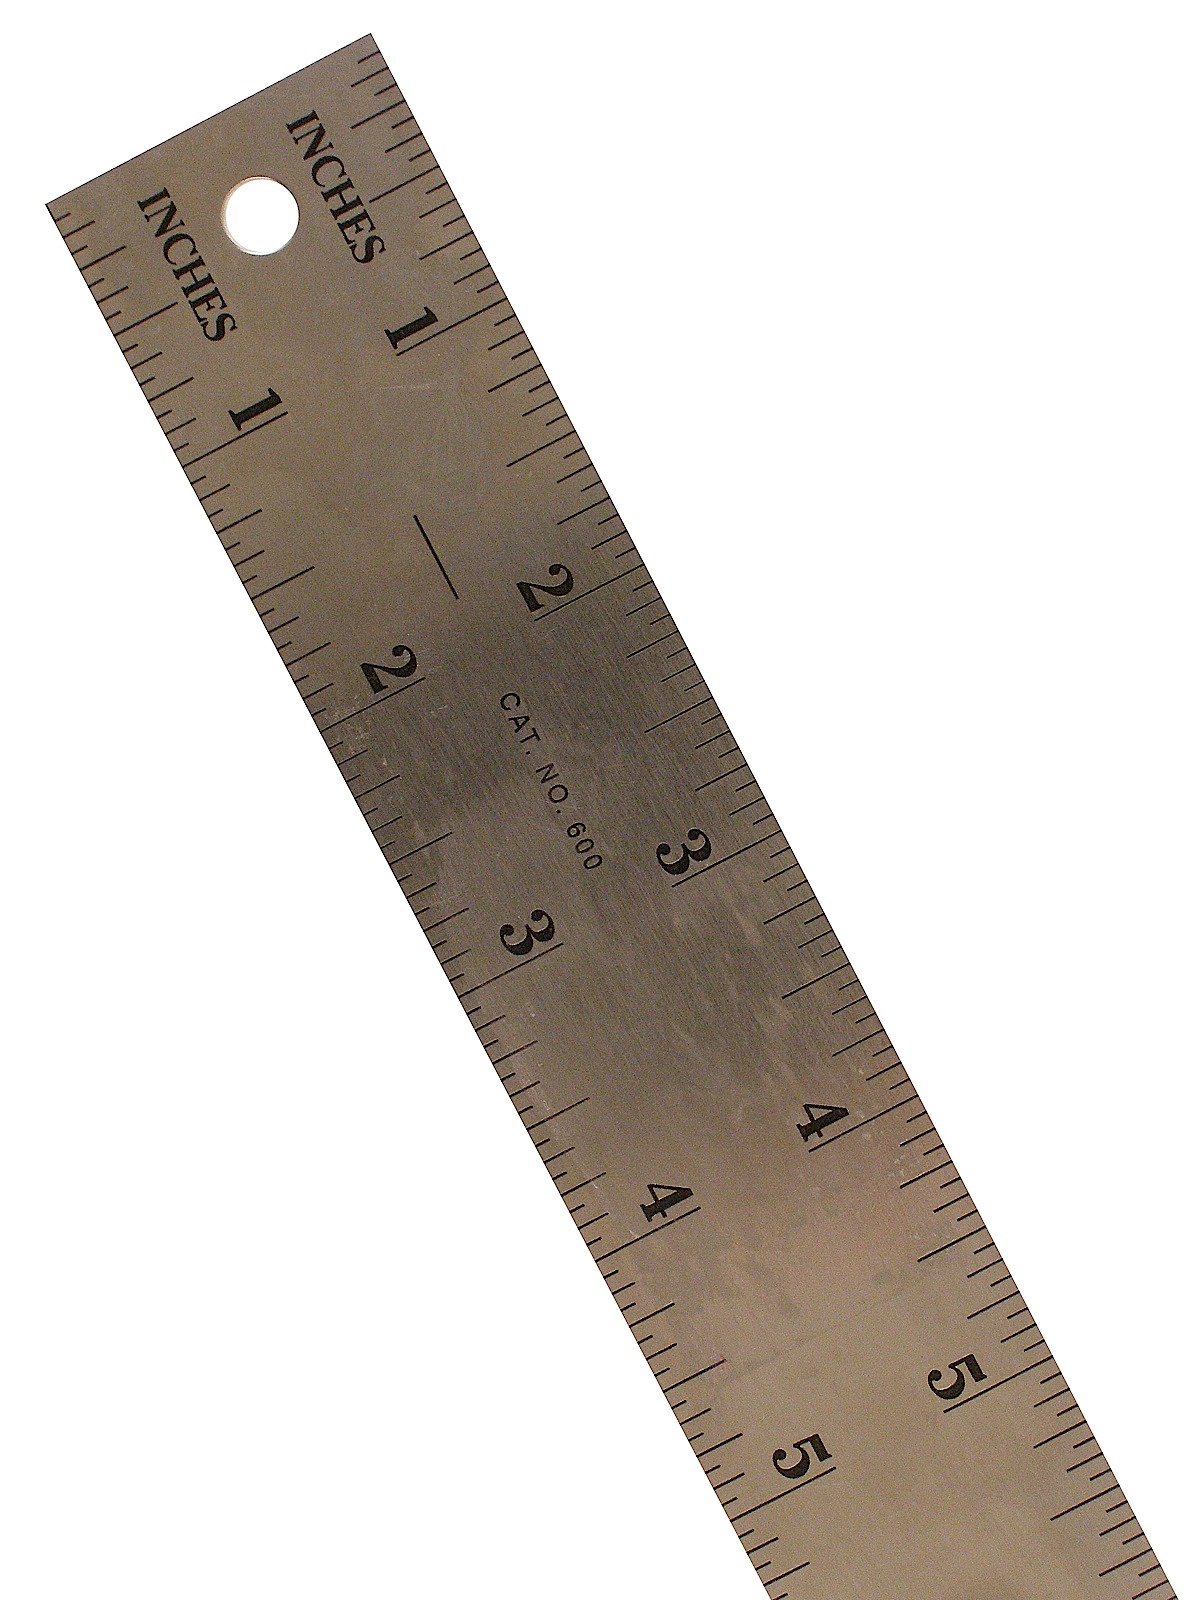 with Metric and Imperial Markings Règle Acier Inoxydable avec Graduations métriques 600 mm 600mm Double-Sided Scale Argenté Lufkin LSR600 Precision Stainless Steel Ruler 